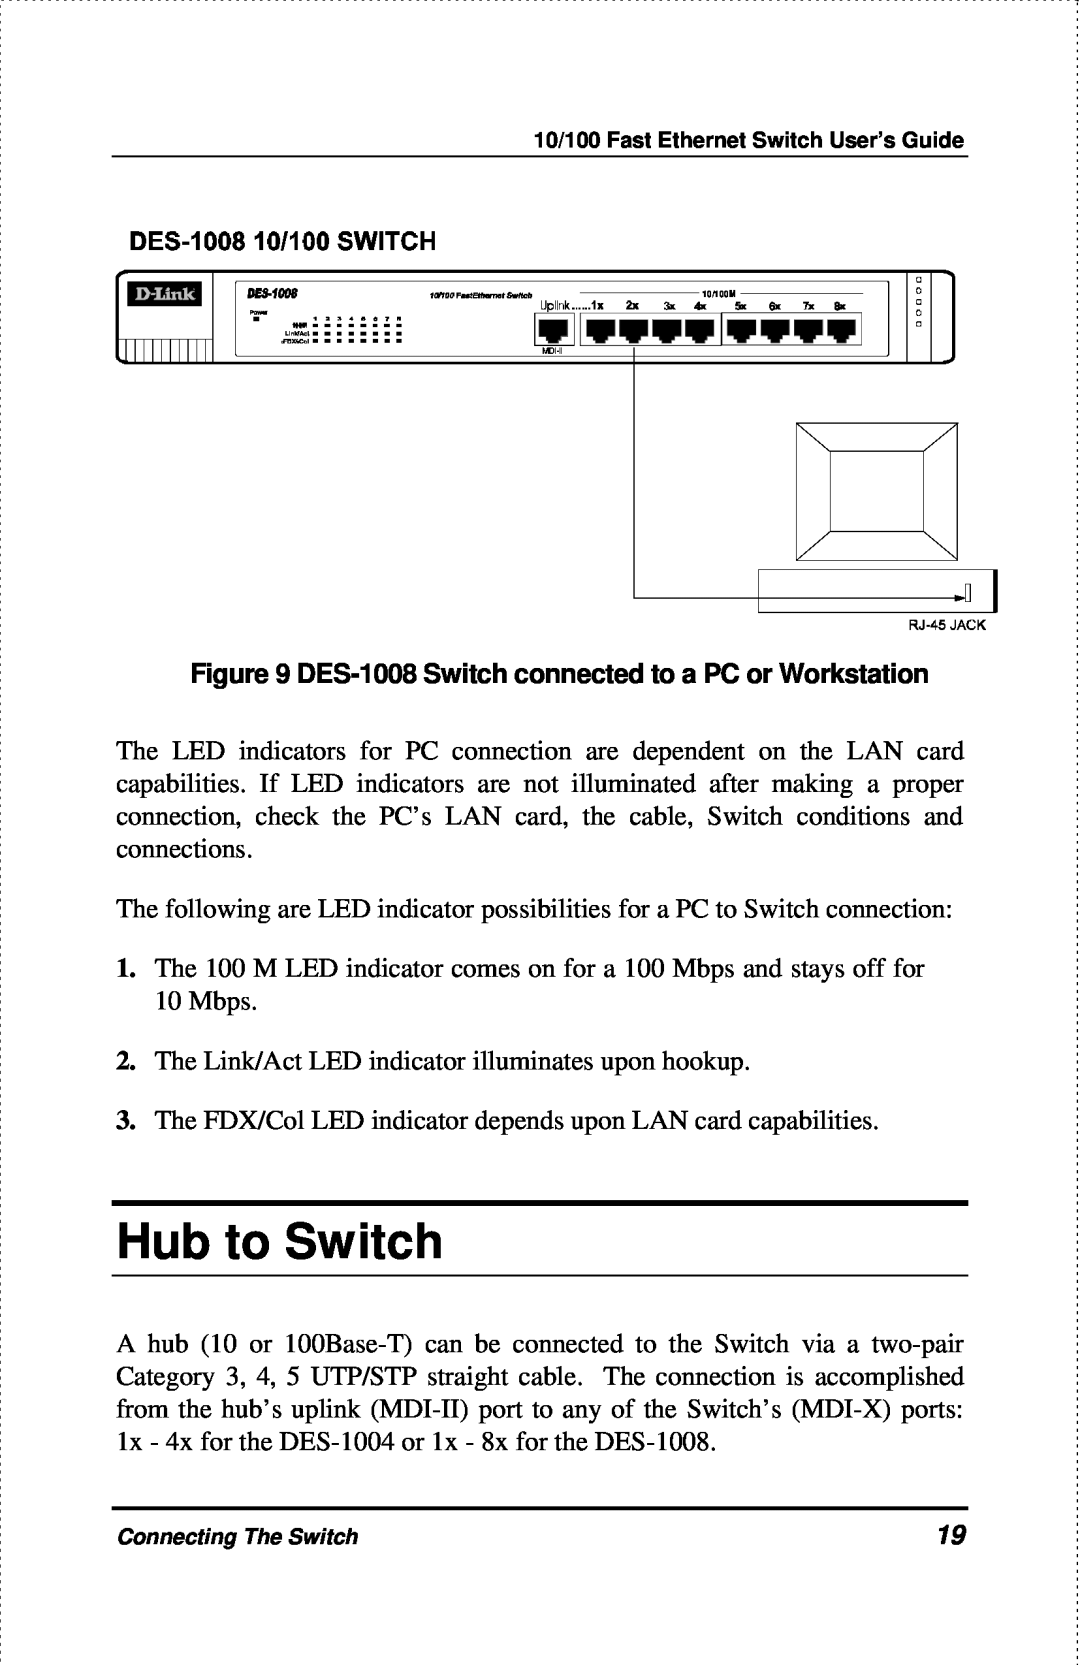 D-Link DES-1004 manual Hub to Switch, DES-1008 Switch connected to a PC or Workstation 